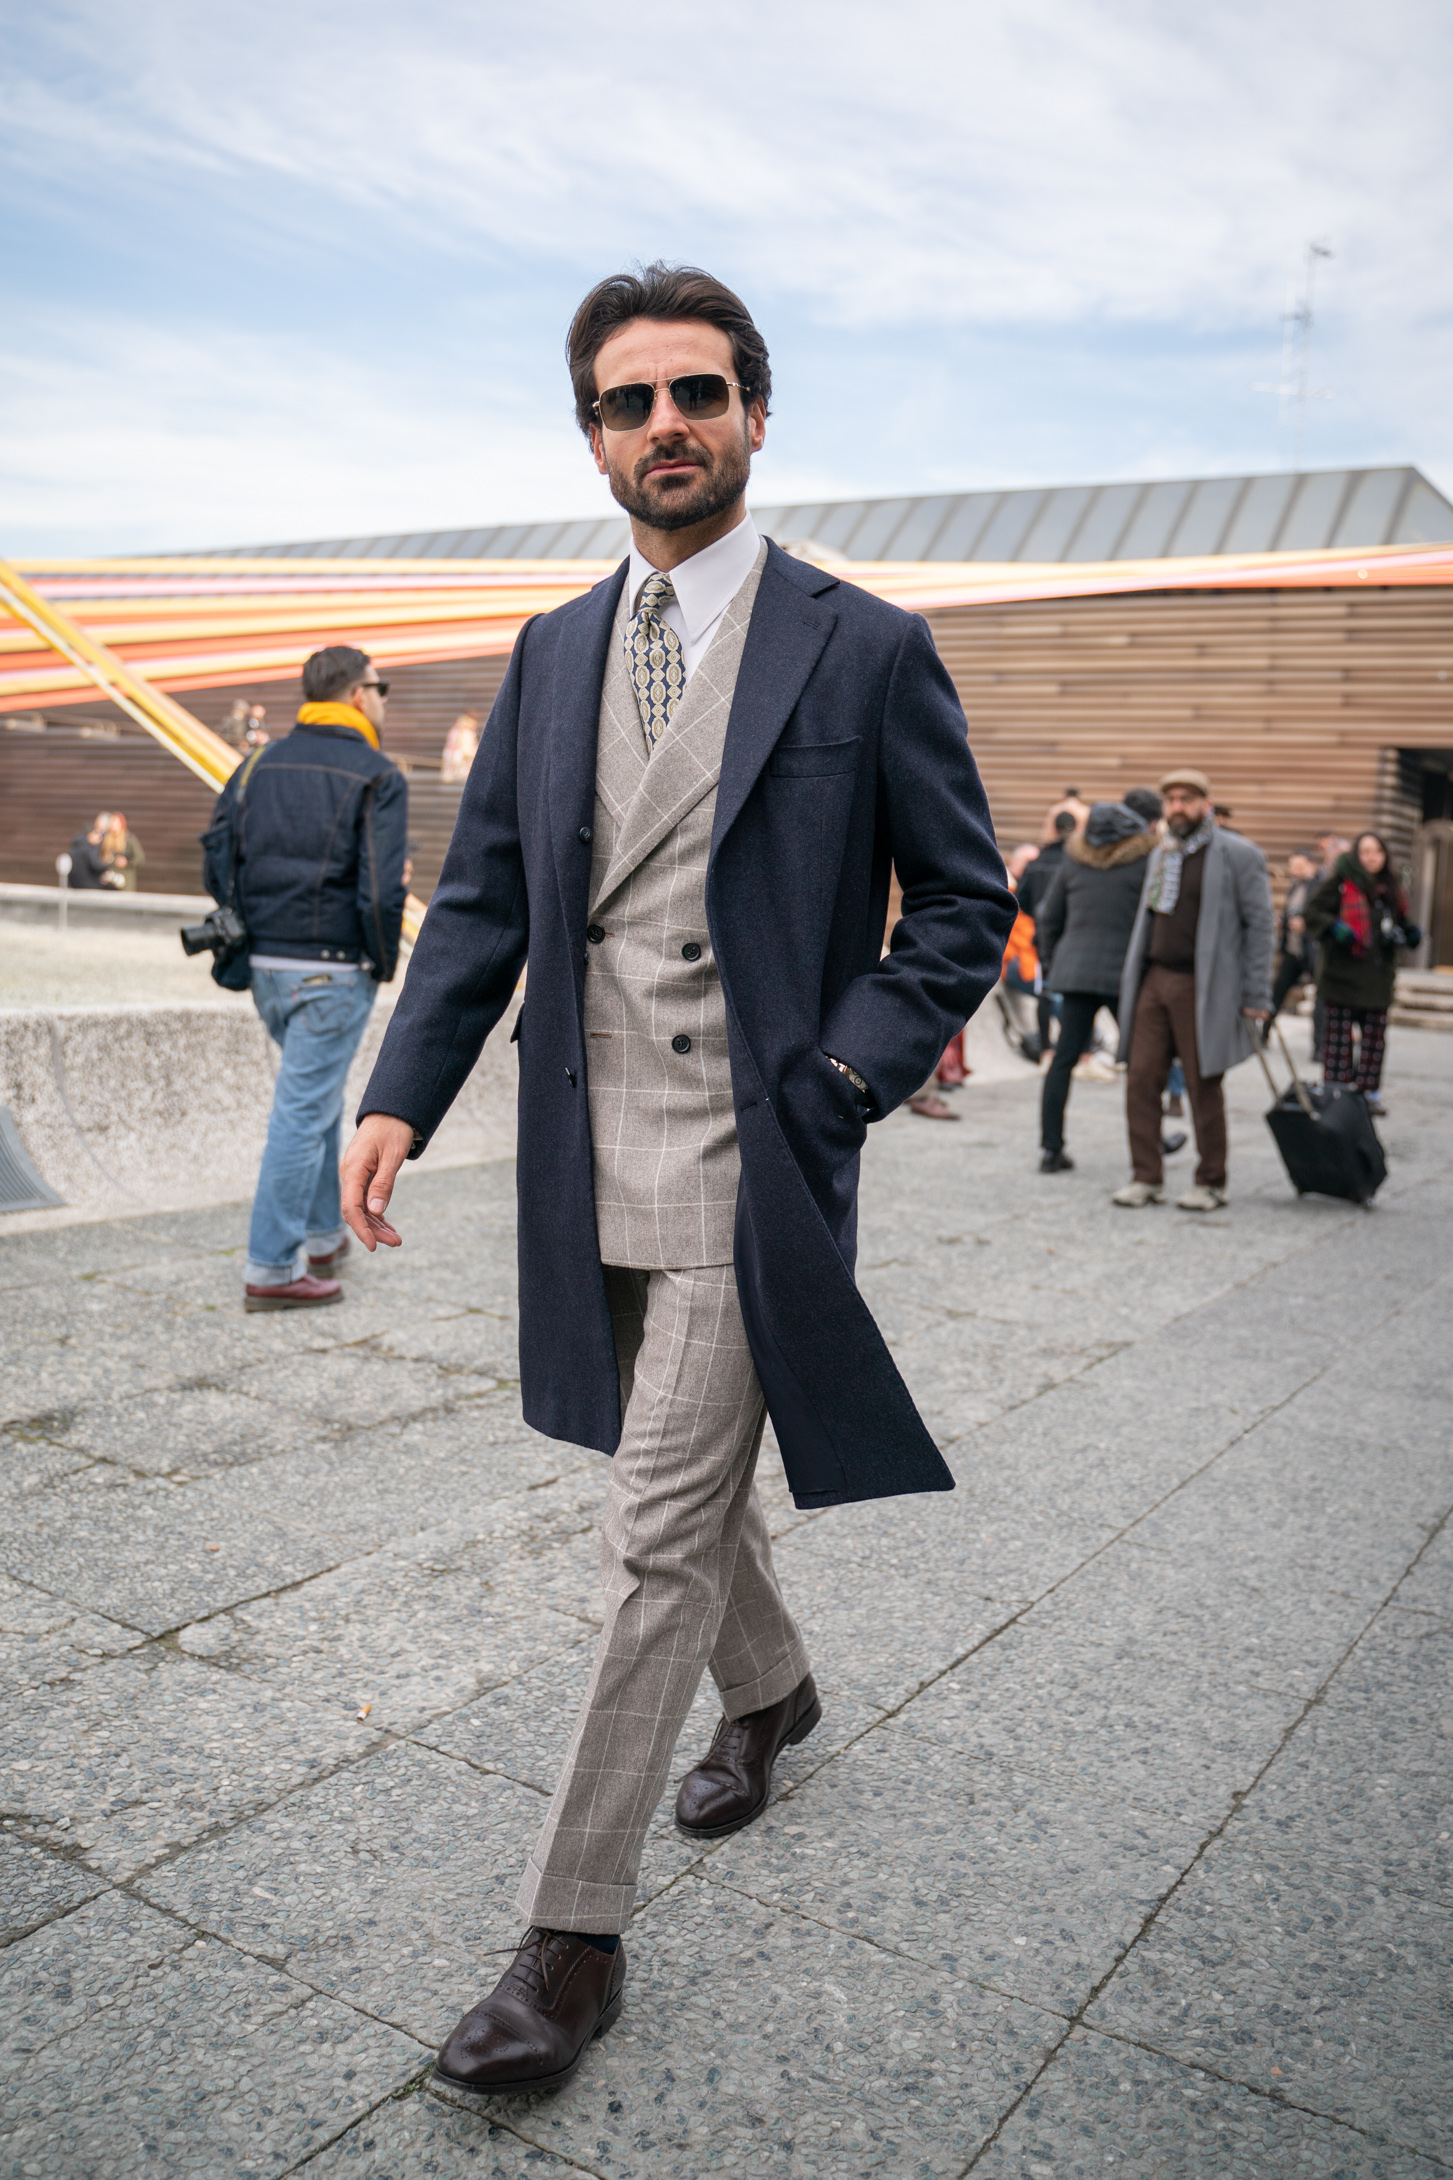 The Best Street Style From Pitti Uomo 97 - ICON